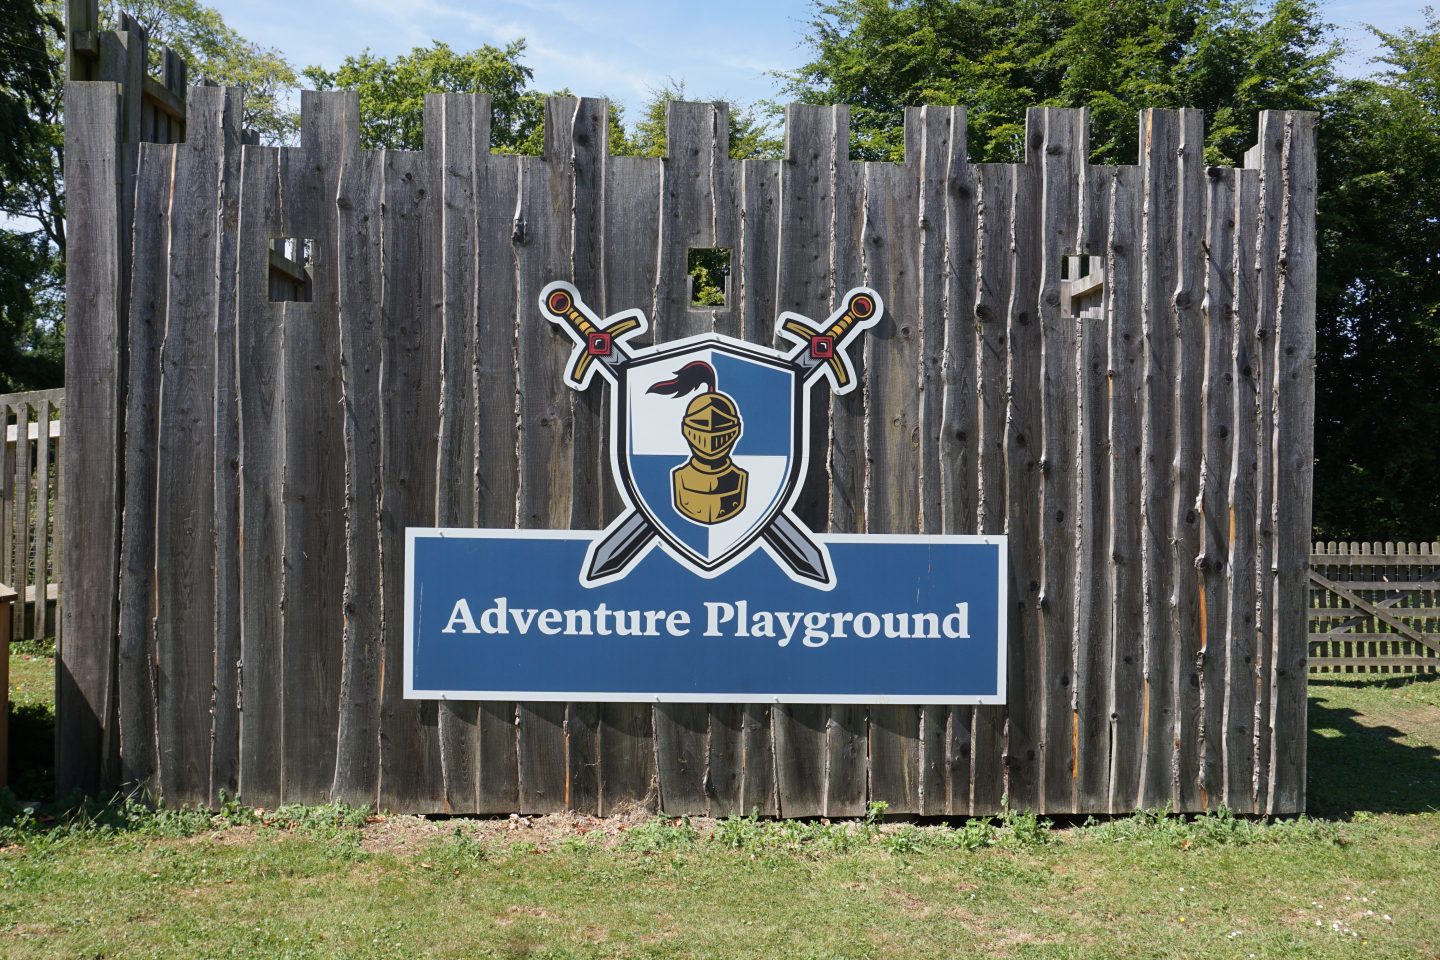 Entrance to the adventure playground at Sudeley Castle